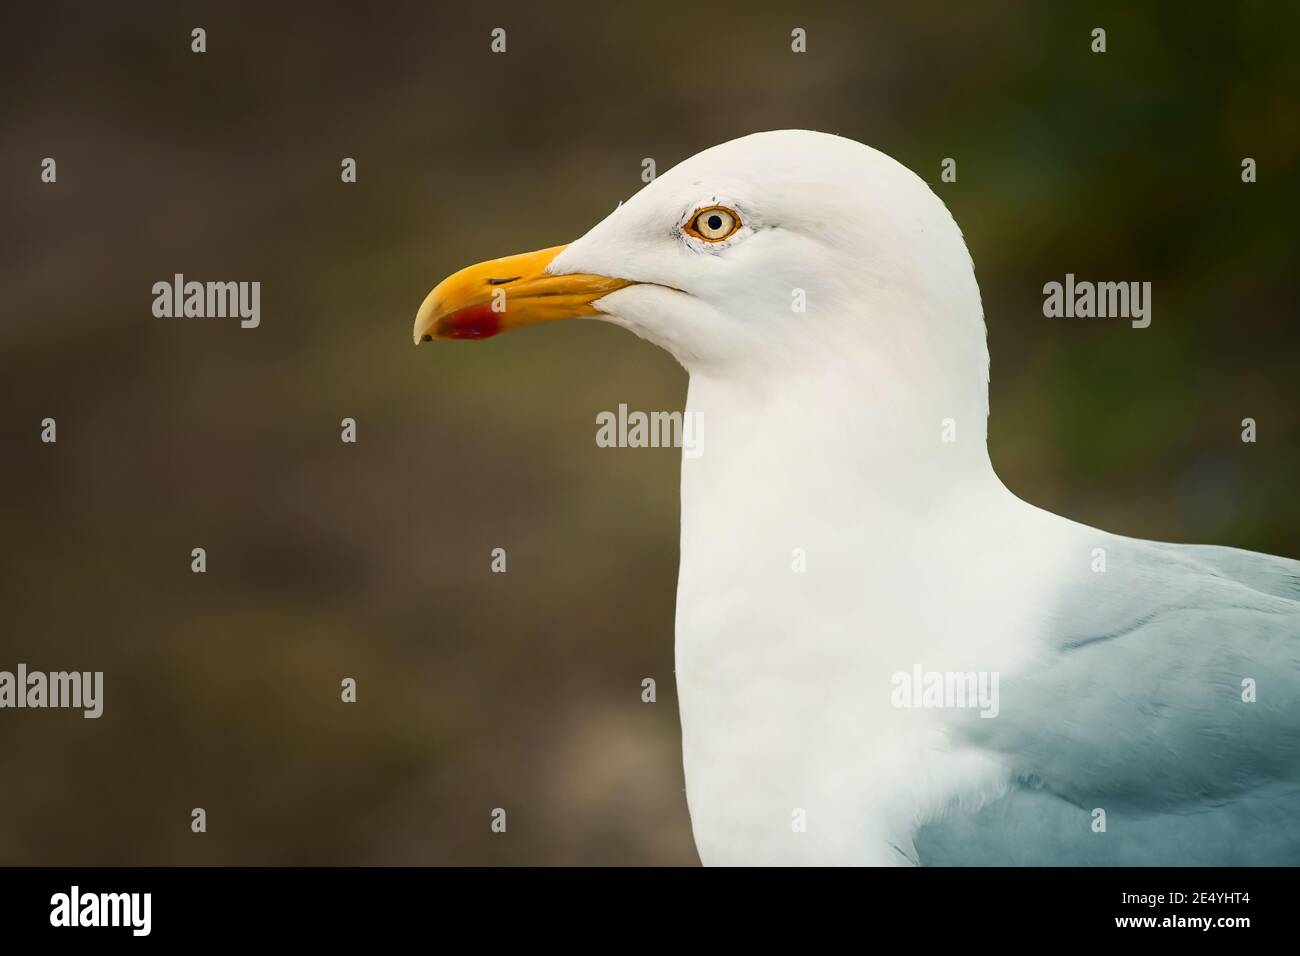 Close up of Larus marinus great black backed gull bird looking left on blurred background Stock Photo